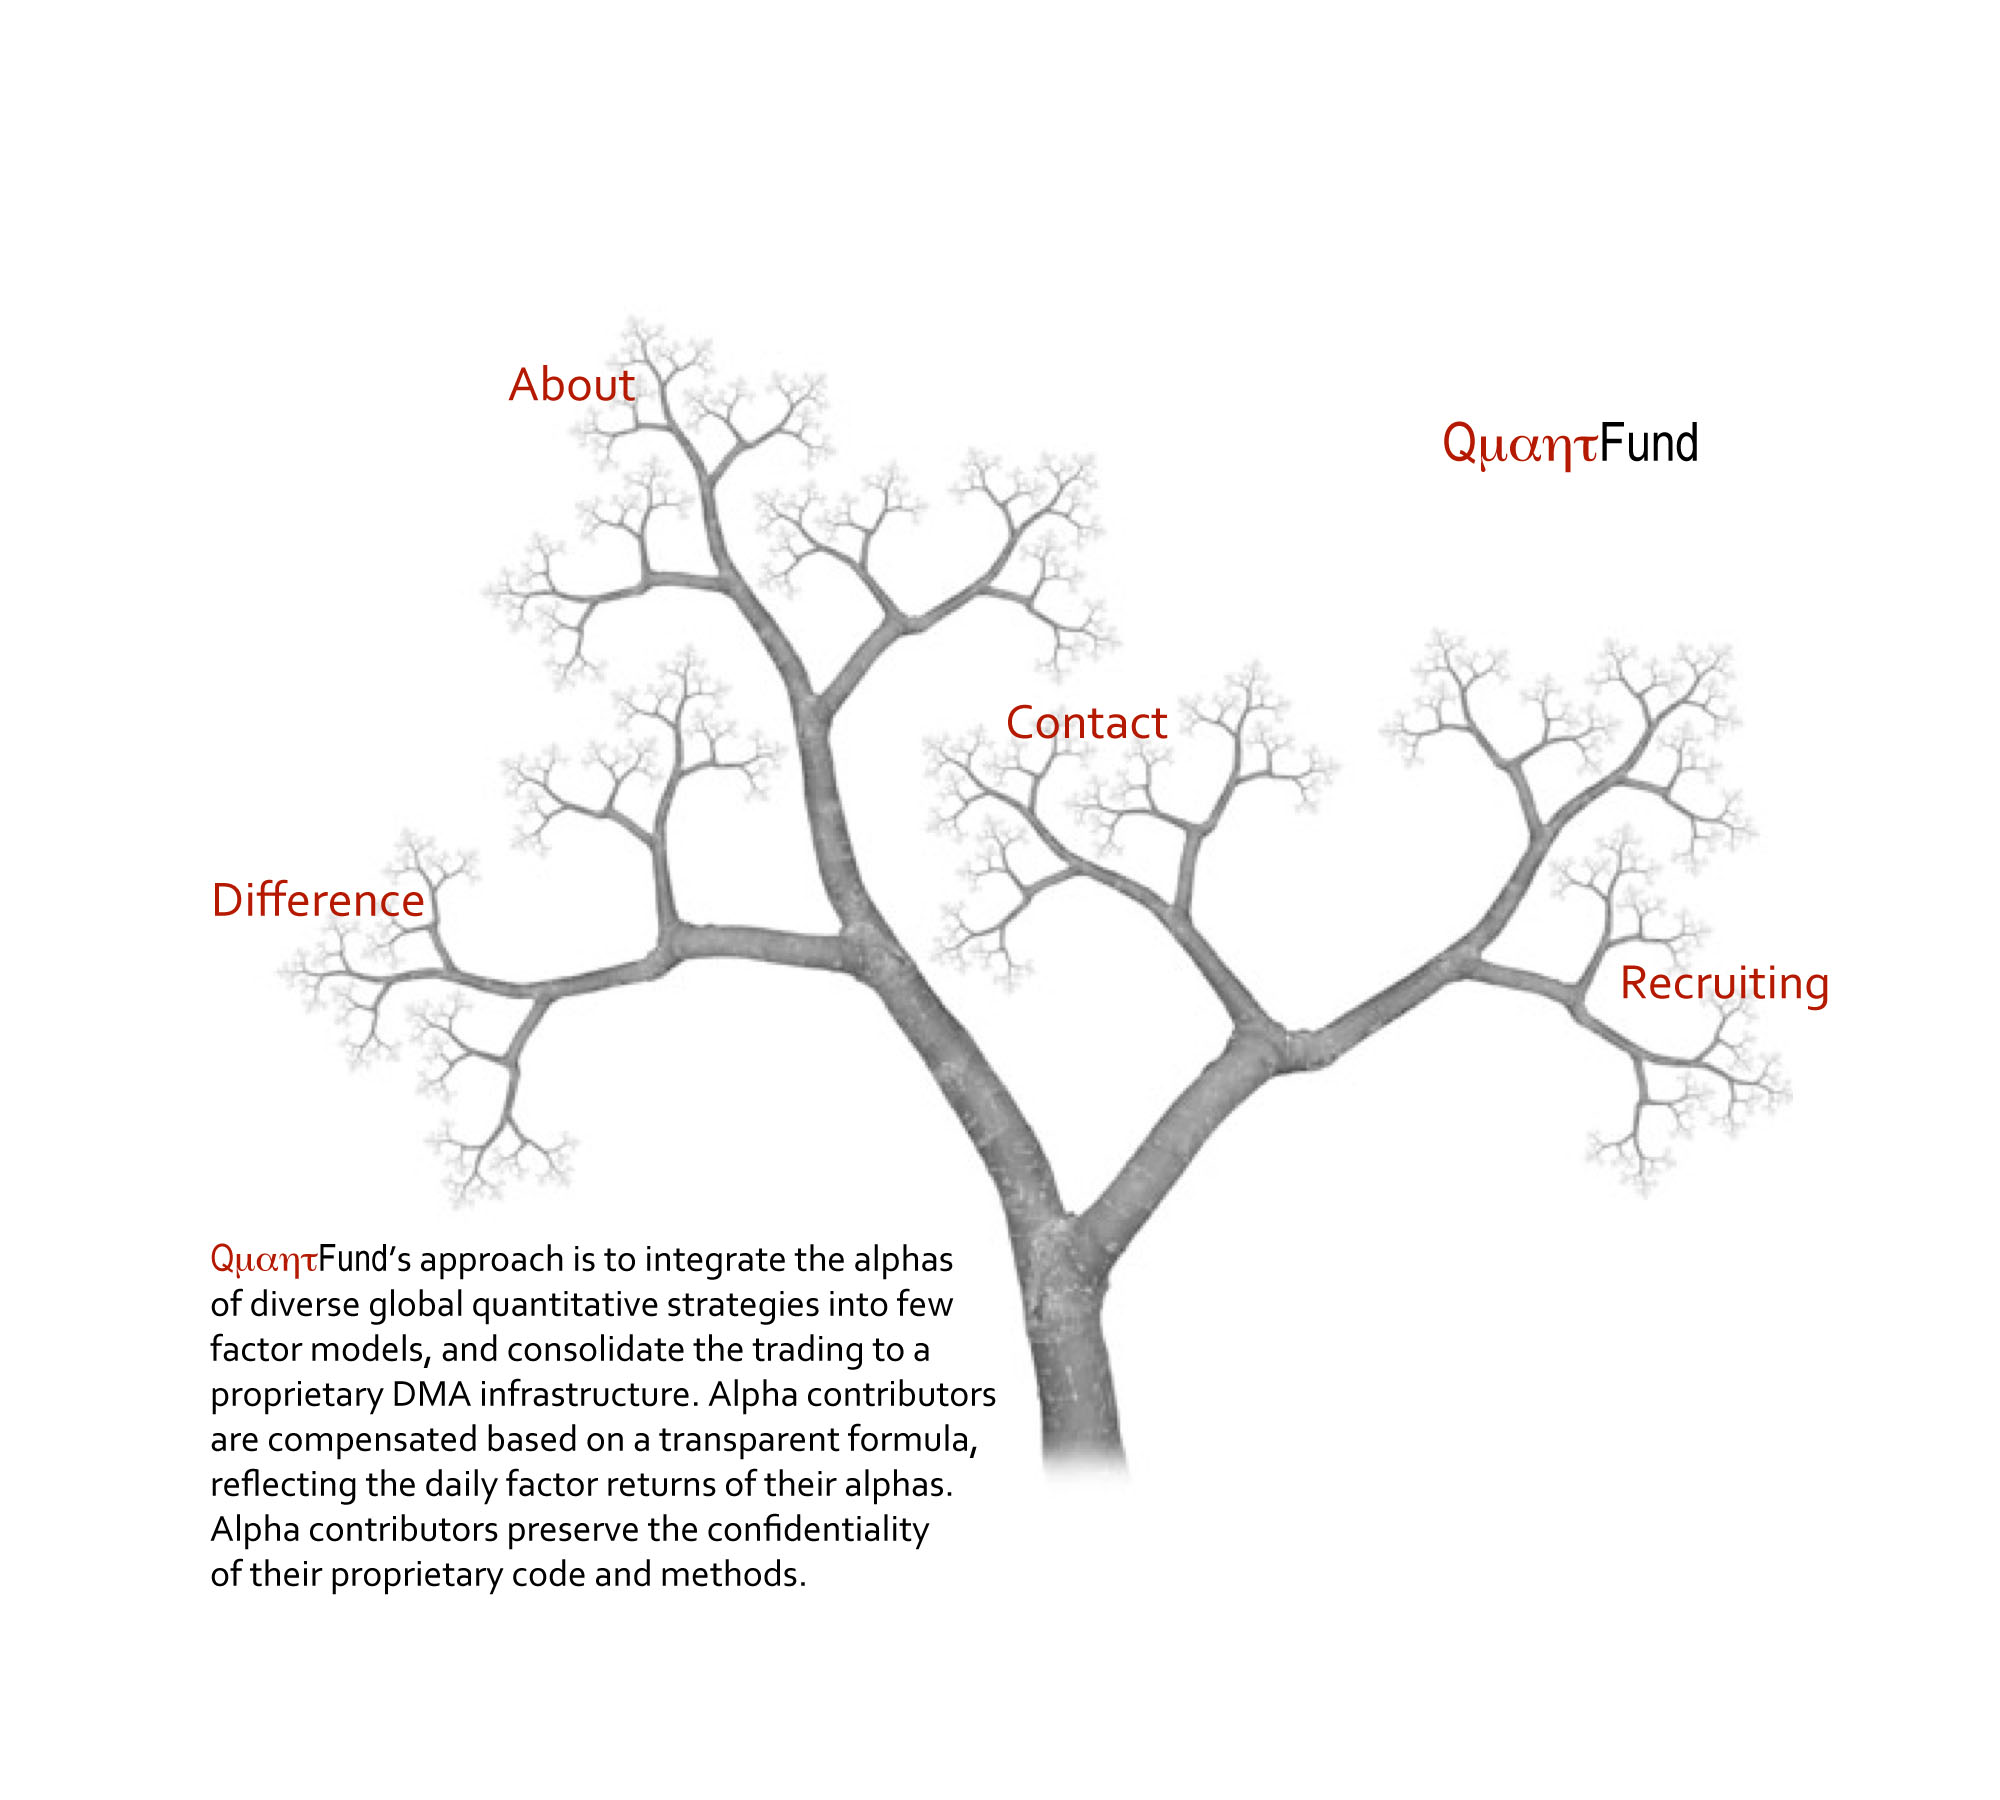 QuantFund's approach is to integrate the alphas of diverse global quantitative strategies into few factor models, and consolidate the trading to a proprietary DMA infrastructure. Alpha contributors are compensated based on a transparent formula, reflecting the daily factor returns of their alphas. Alpha contributors preserve the confidentiality of their proprietary code and methods.